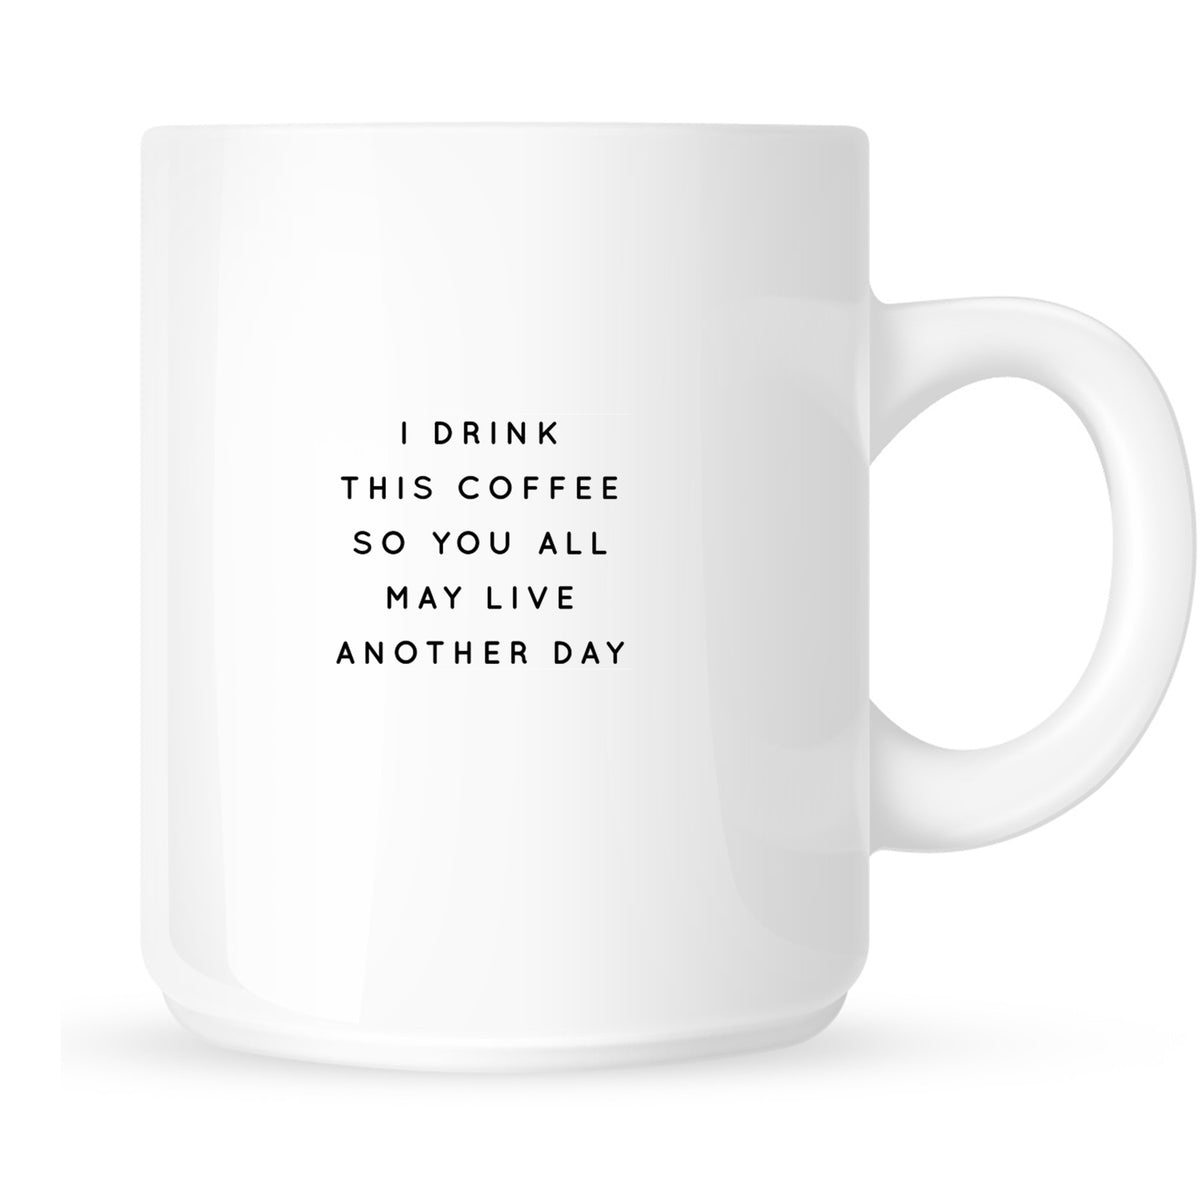 Mug - I Drink This Coffee So You All May Live Another Day